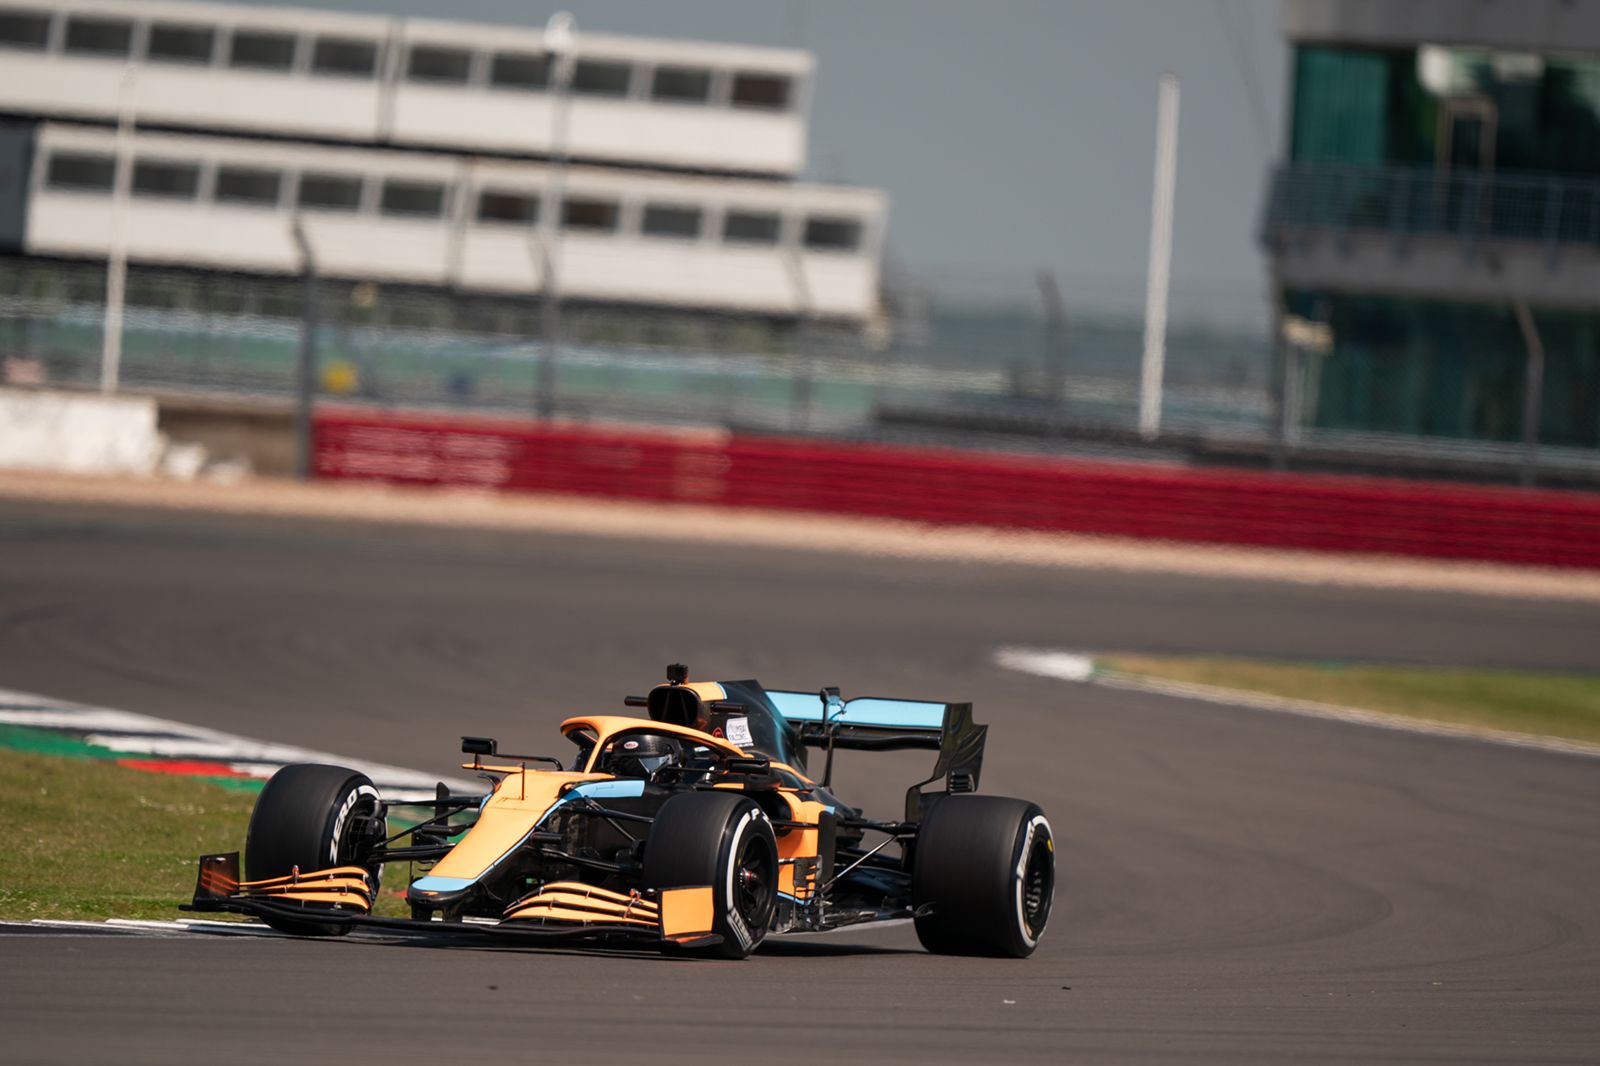 WATCH | Jehan Daruvala completes Formula One test with McLaren at Silverstone